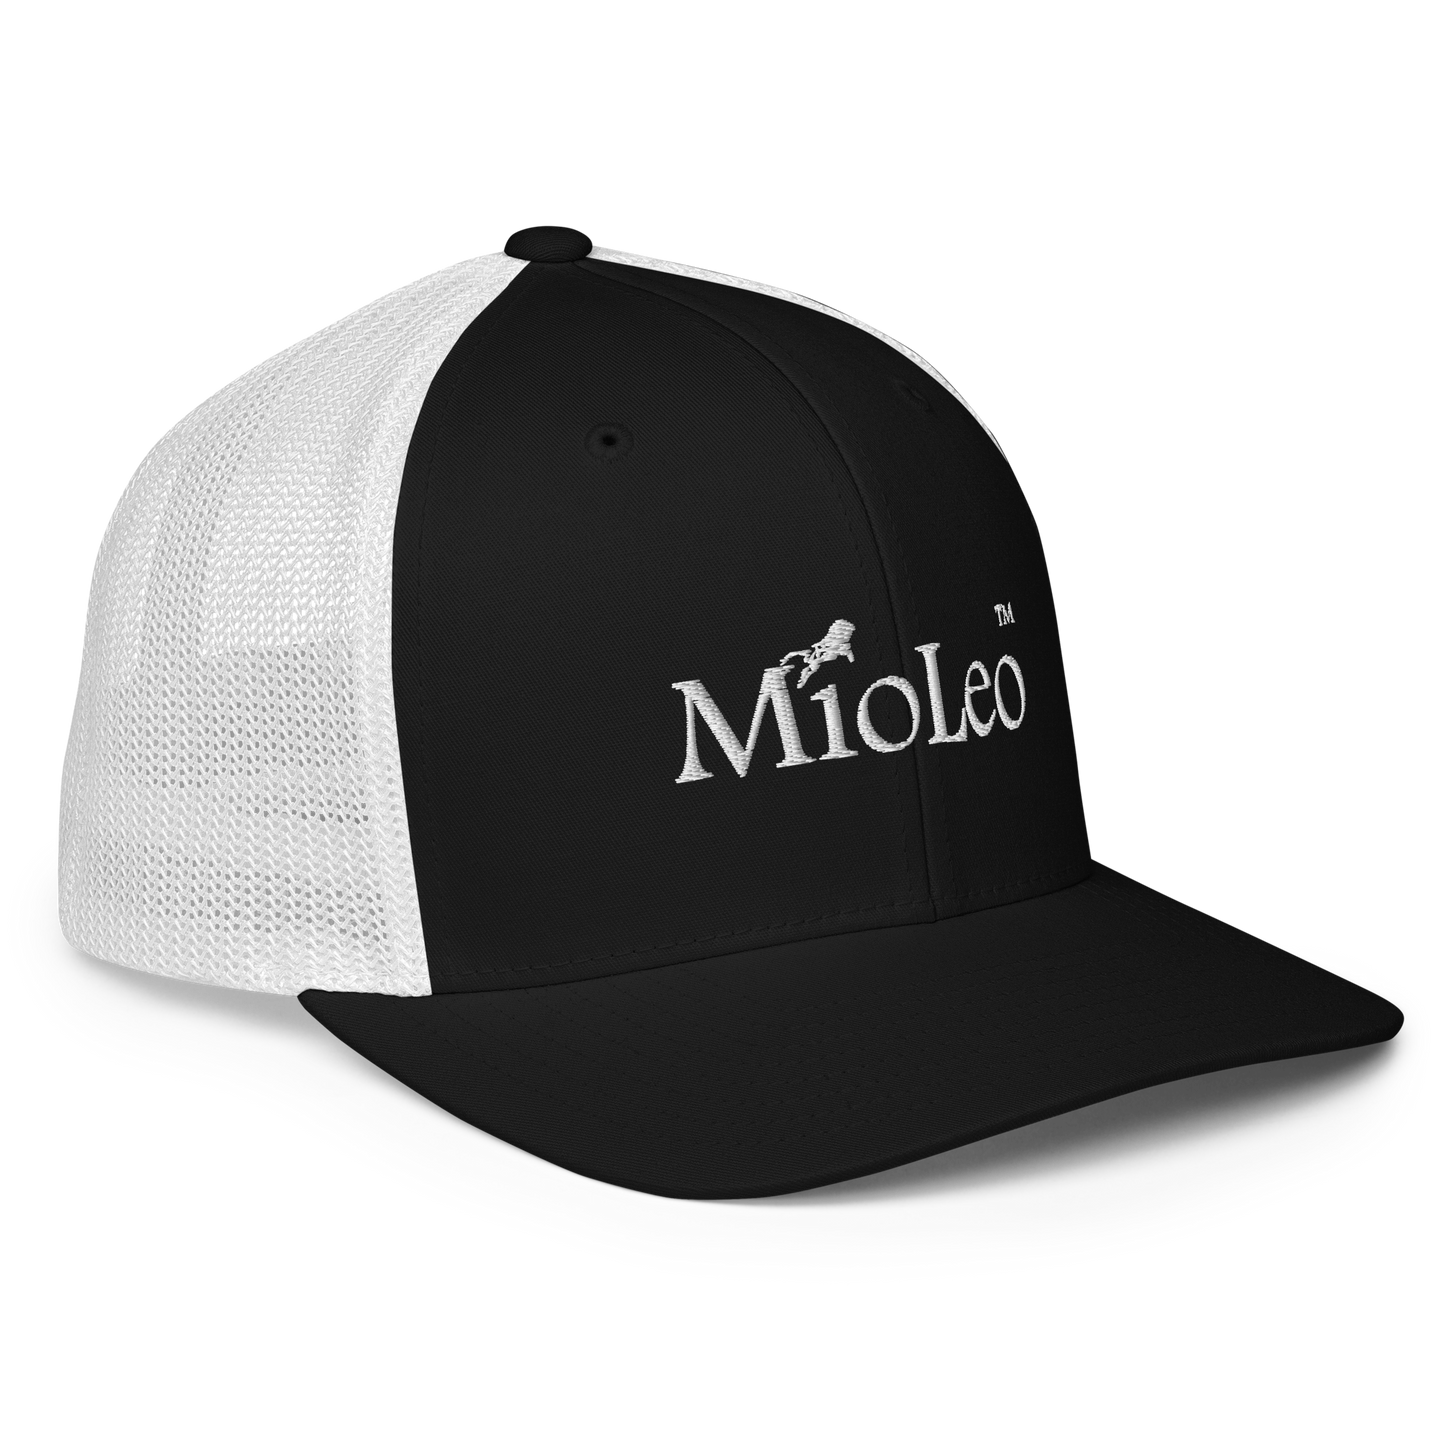 Closed-back trucker cap White-Line No.570 "unlimited" by MioLeo